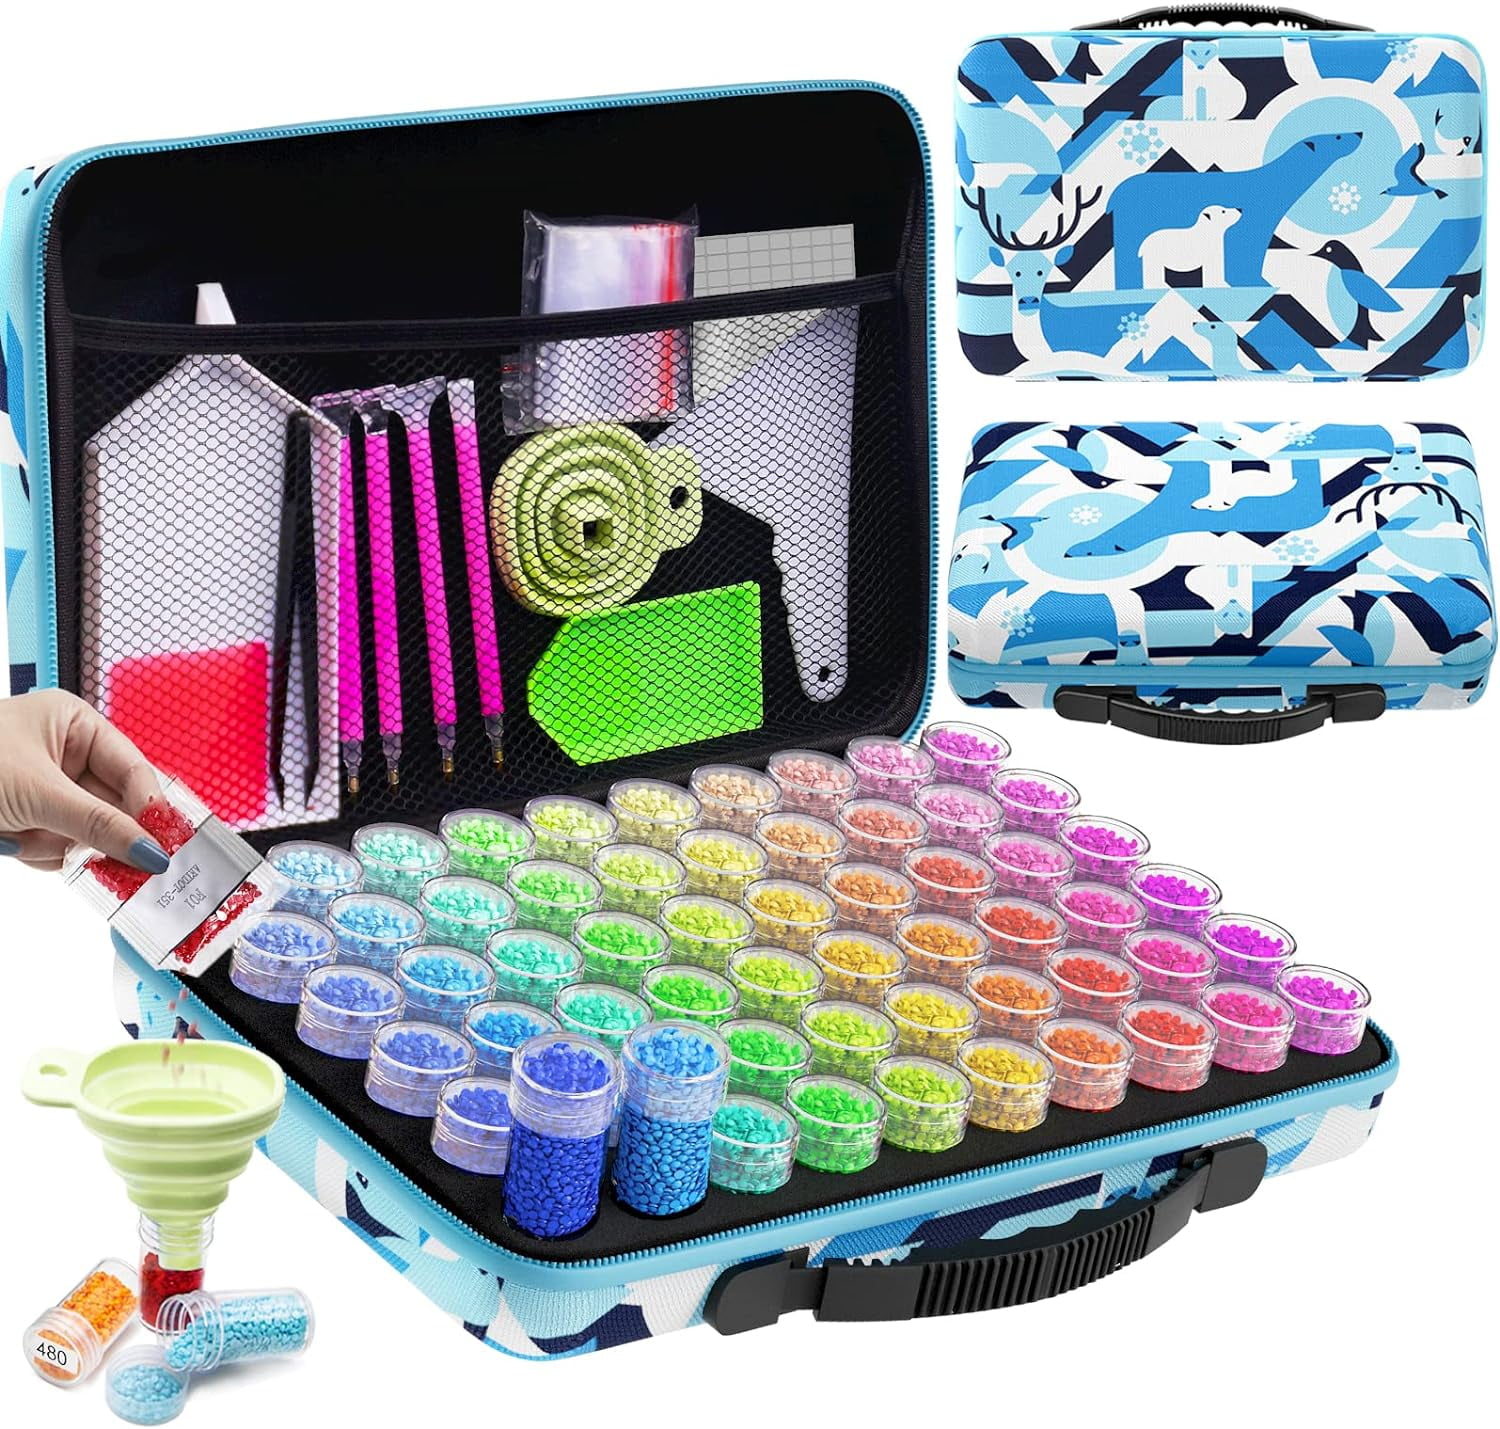 Diamond Painting Tray Organizer, Diy Diamond Painting Tools For Adults,  Diamond Arts Accessory Kit With 12 Slots For Drill Trays